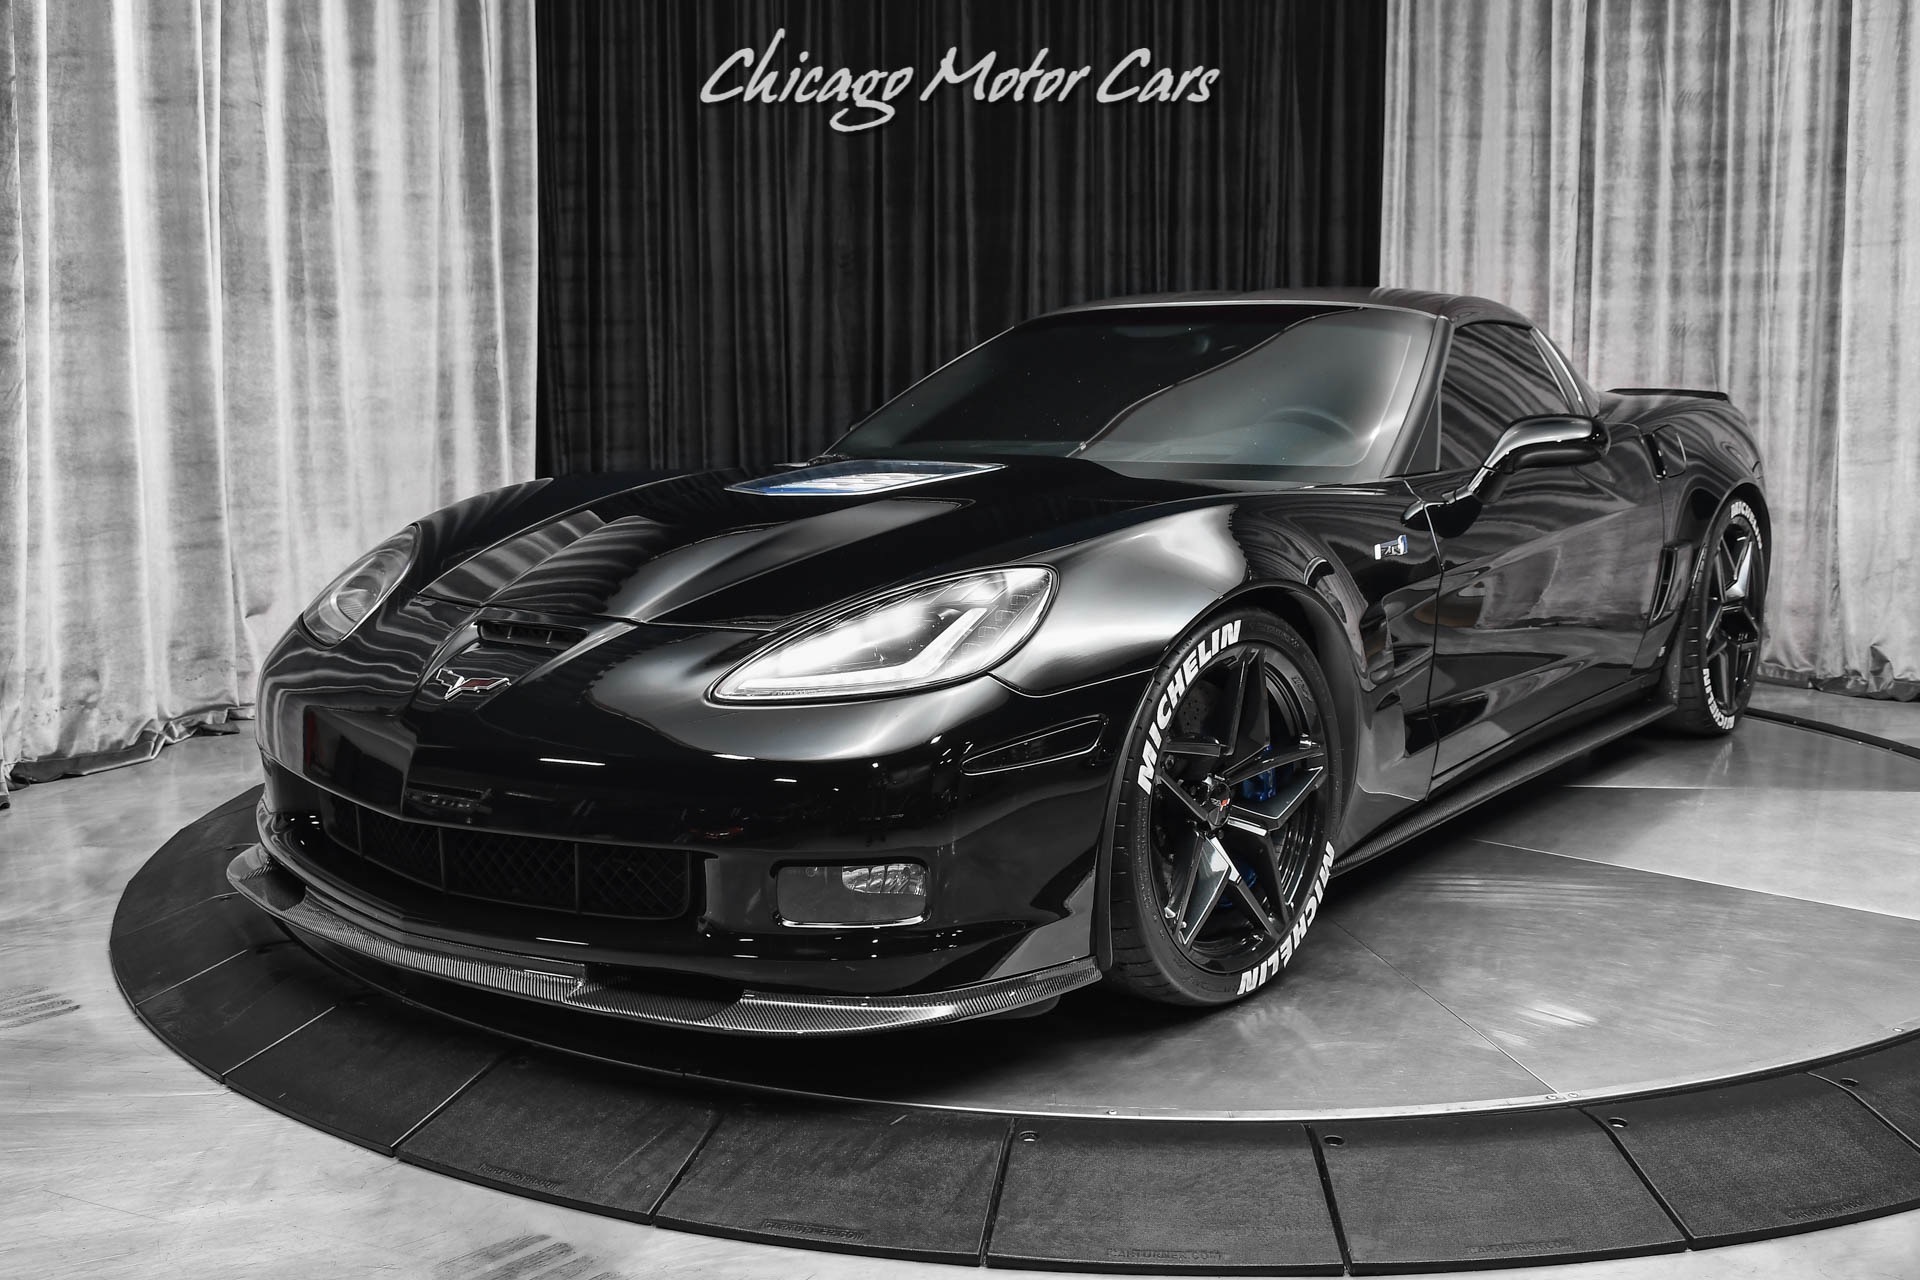 Used-2009-Chevrolet-Corvette-ZR1-Coupe-3ZR-SUPER-LOW-Miles-Tastefully-Modified-Incredible-Example